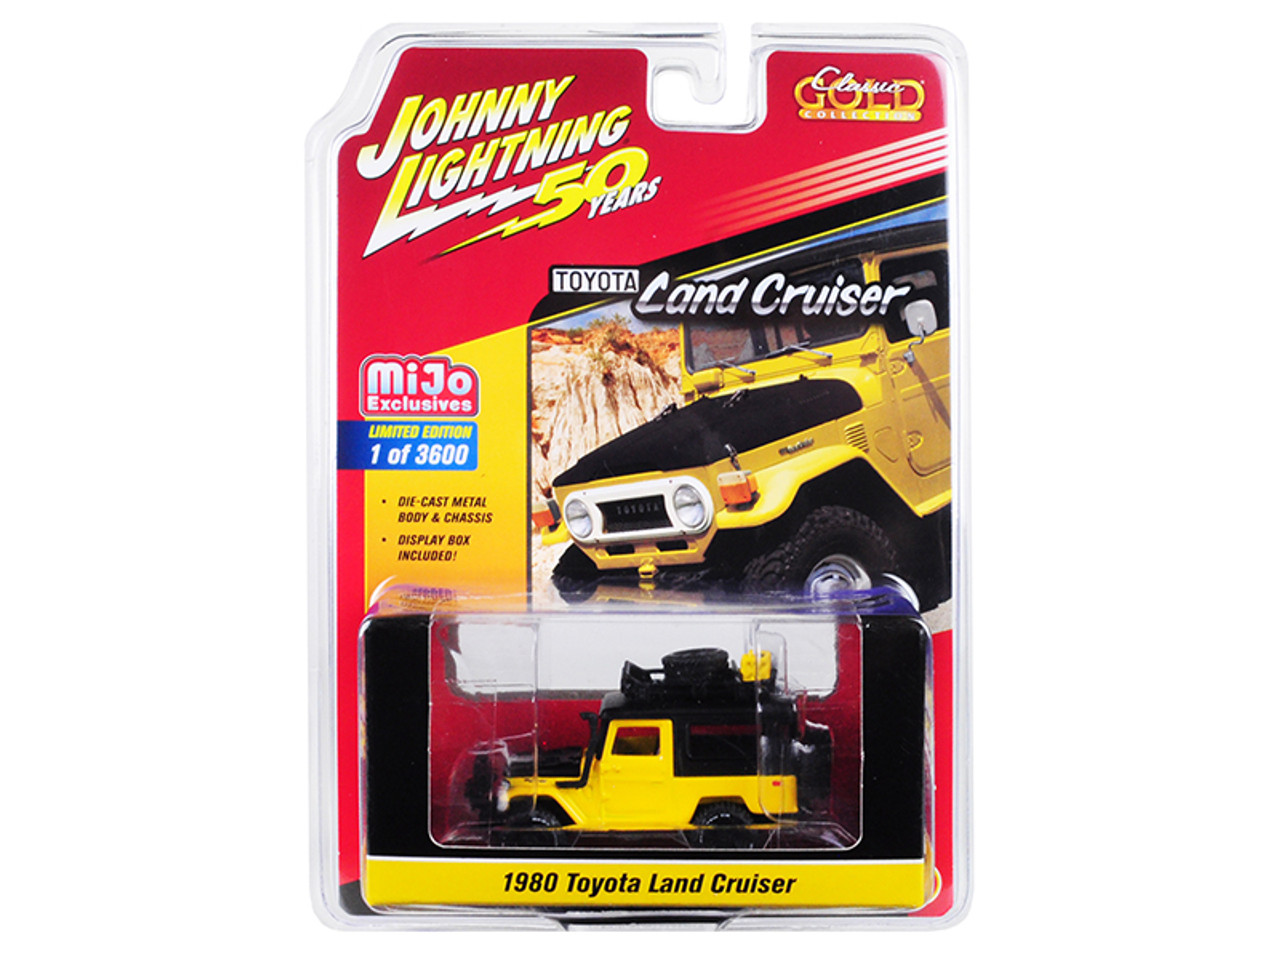 1980 Toyota Land Cruiser Yellow and Black with Accessories "Johnny Lightning 50th Anniversary" Limited Edition to 3600 pieces Worldwide 1/64 Diecast Model Car by Johnny Lightning